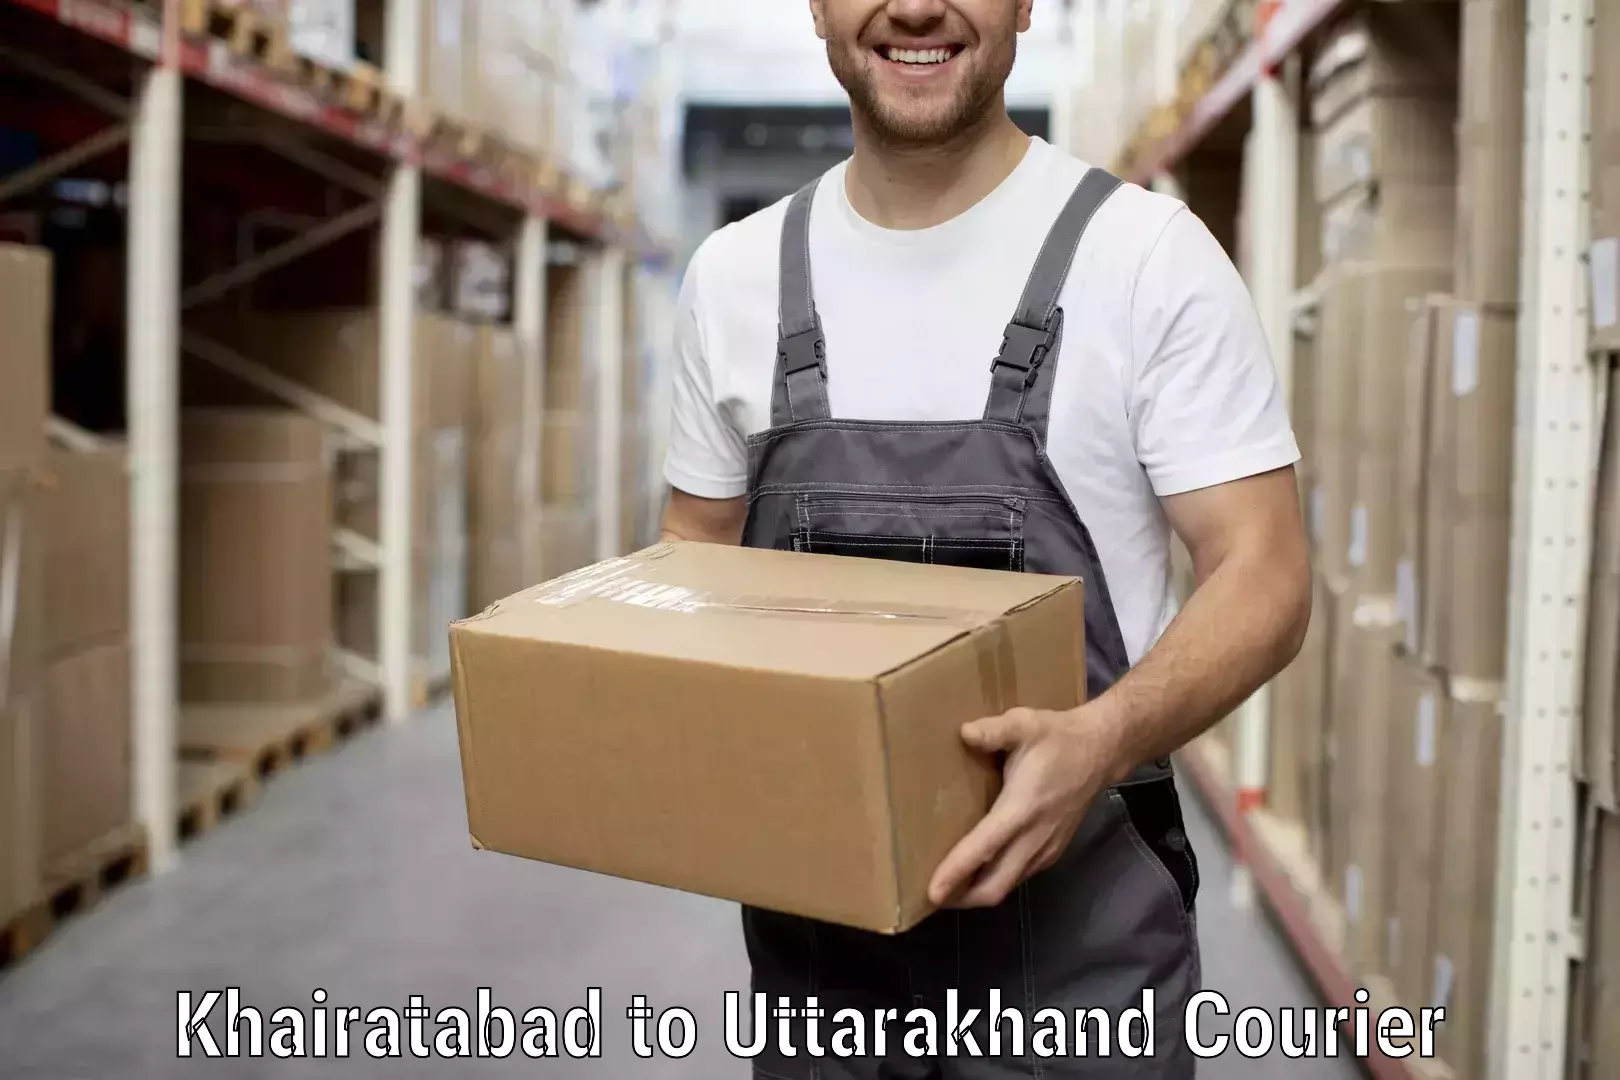 Furniture moving specialists Khairatabad to Tehri Garhwal